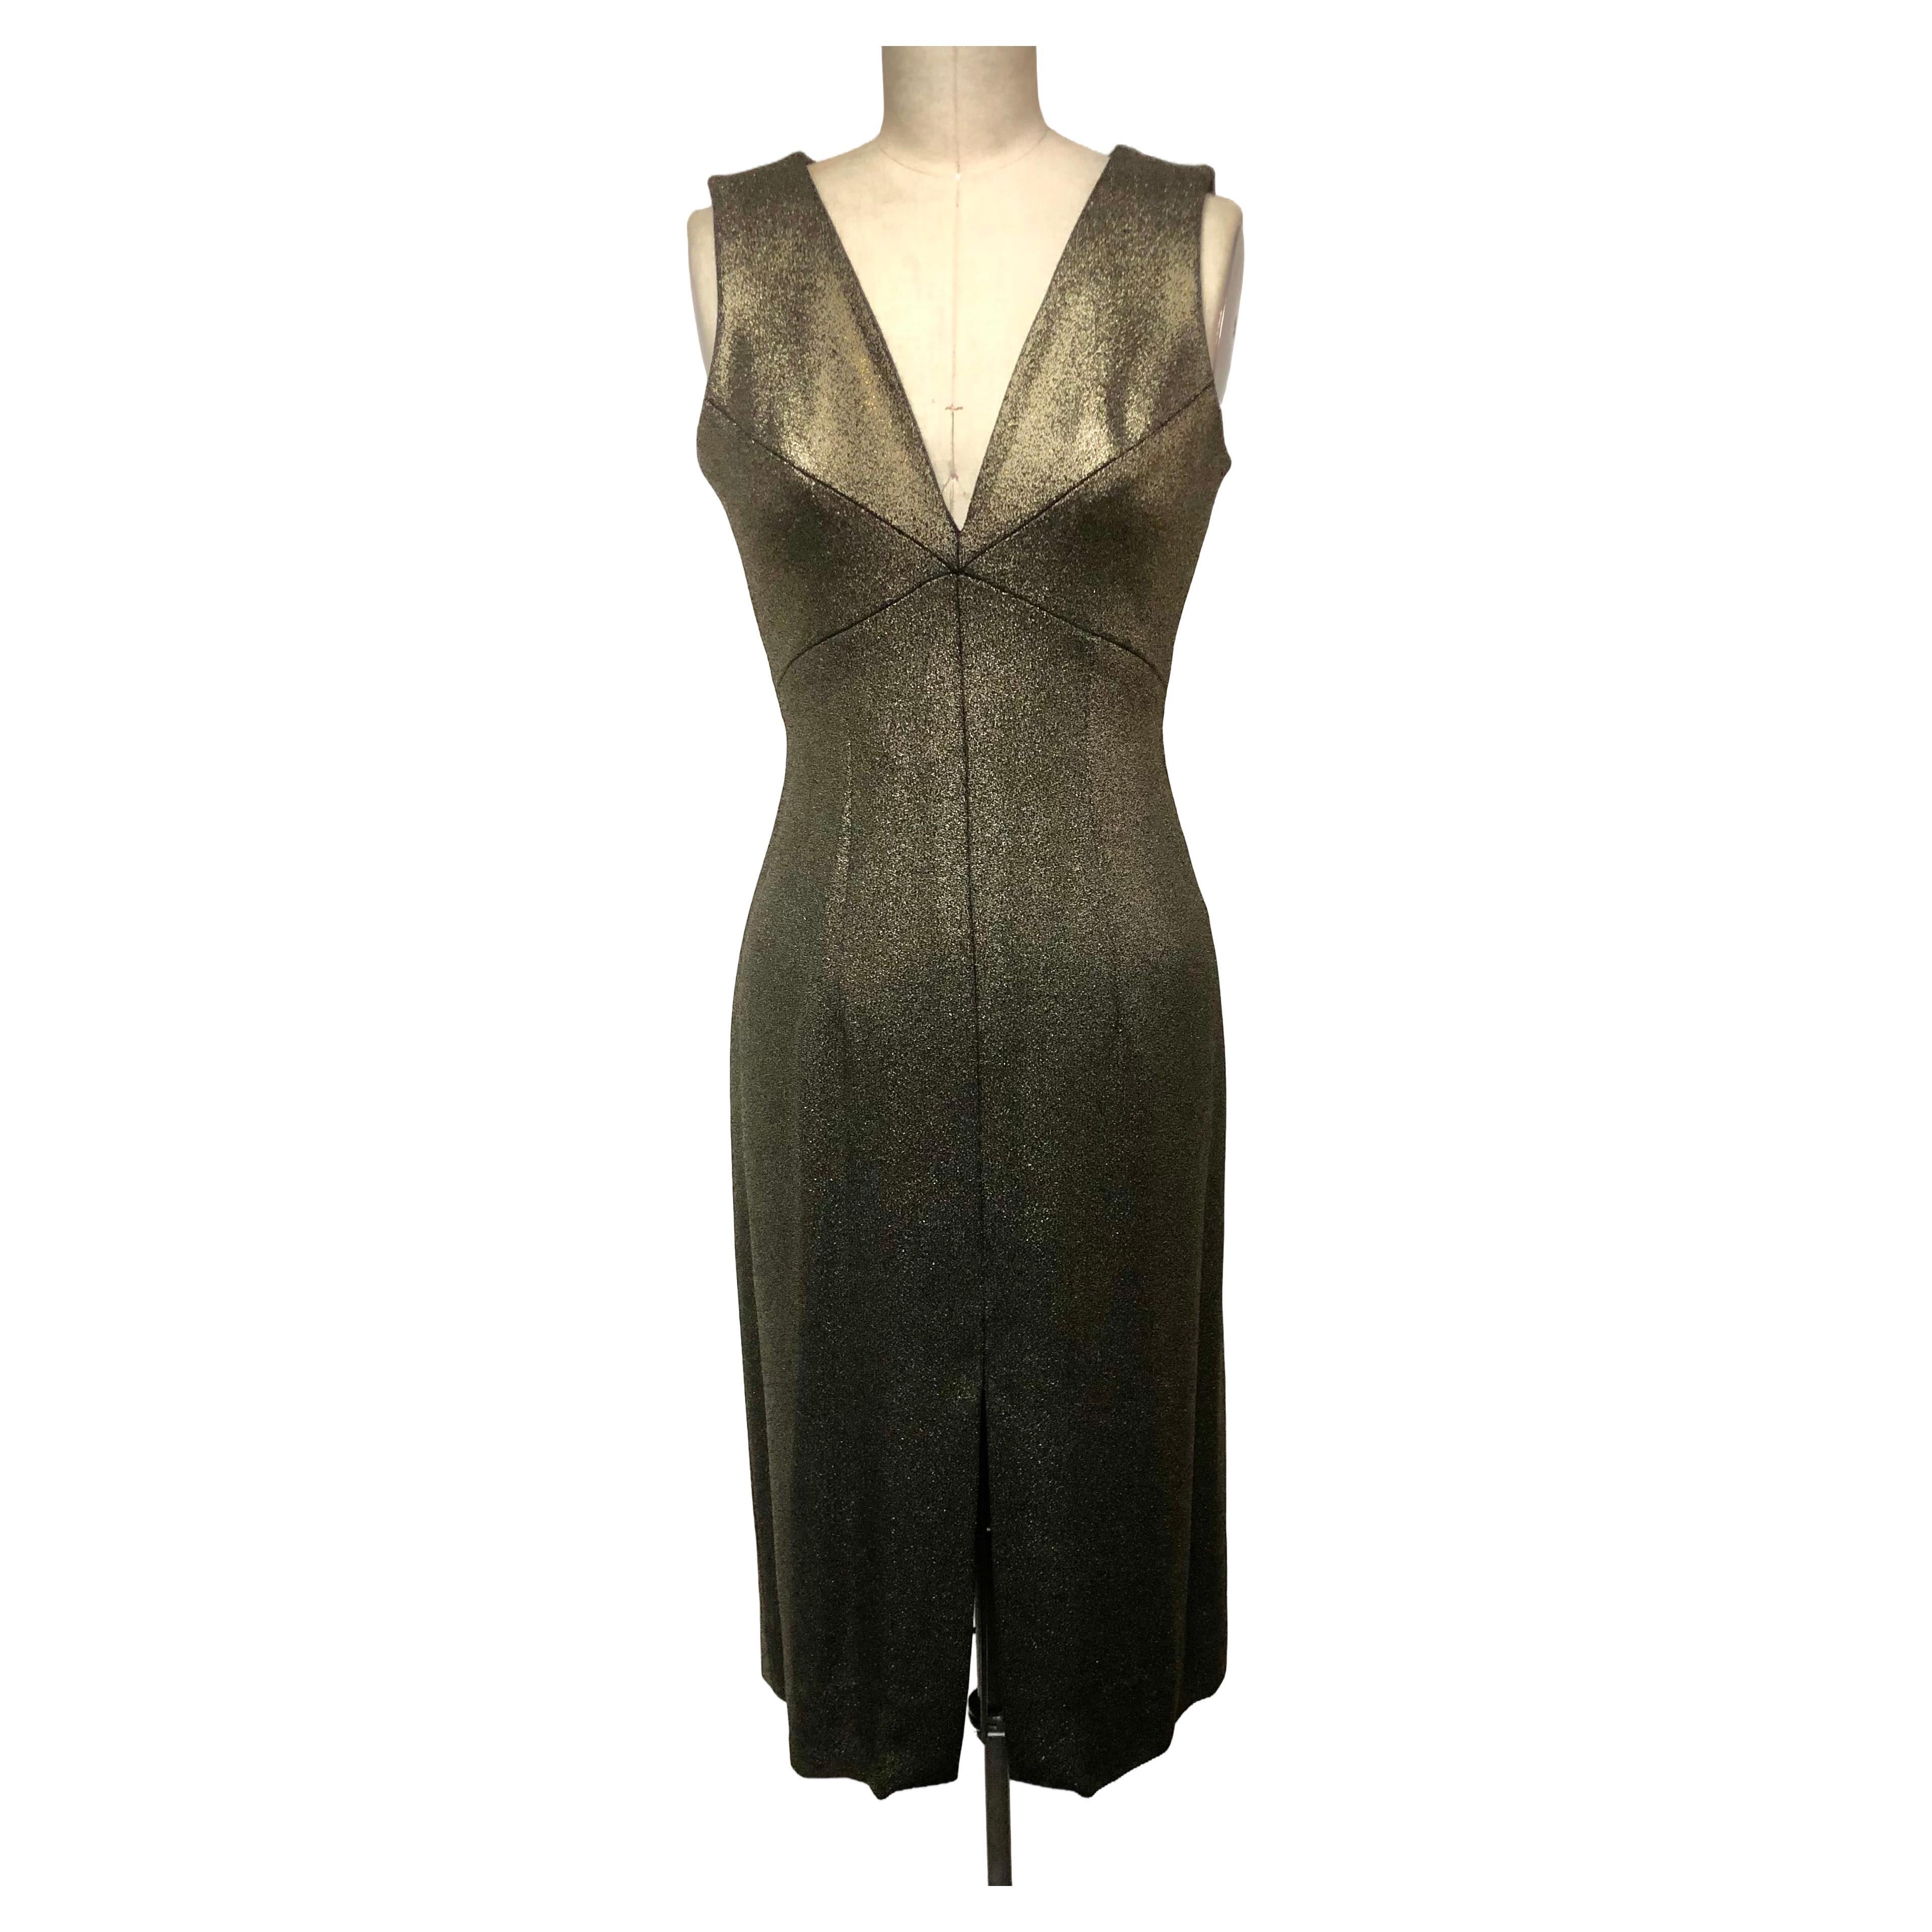  Plunging V Neck Body Dress in Luxurious Taroni Gold Lame For Sale